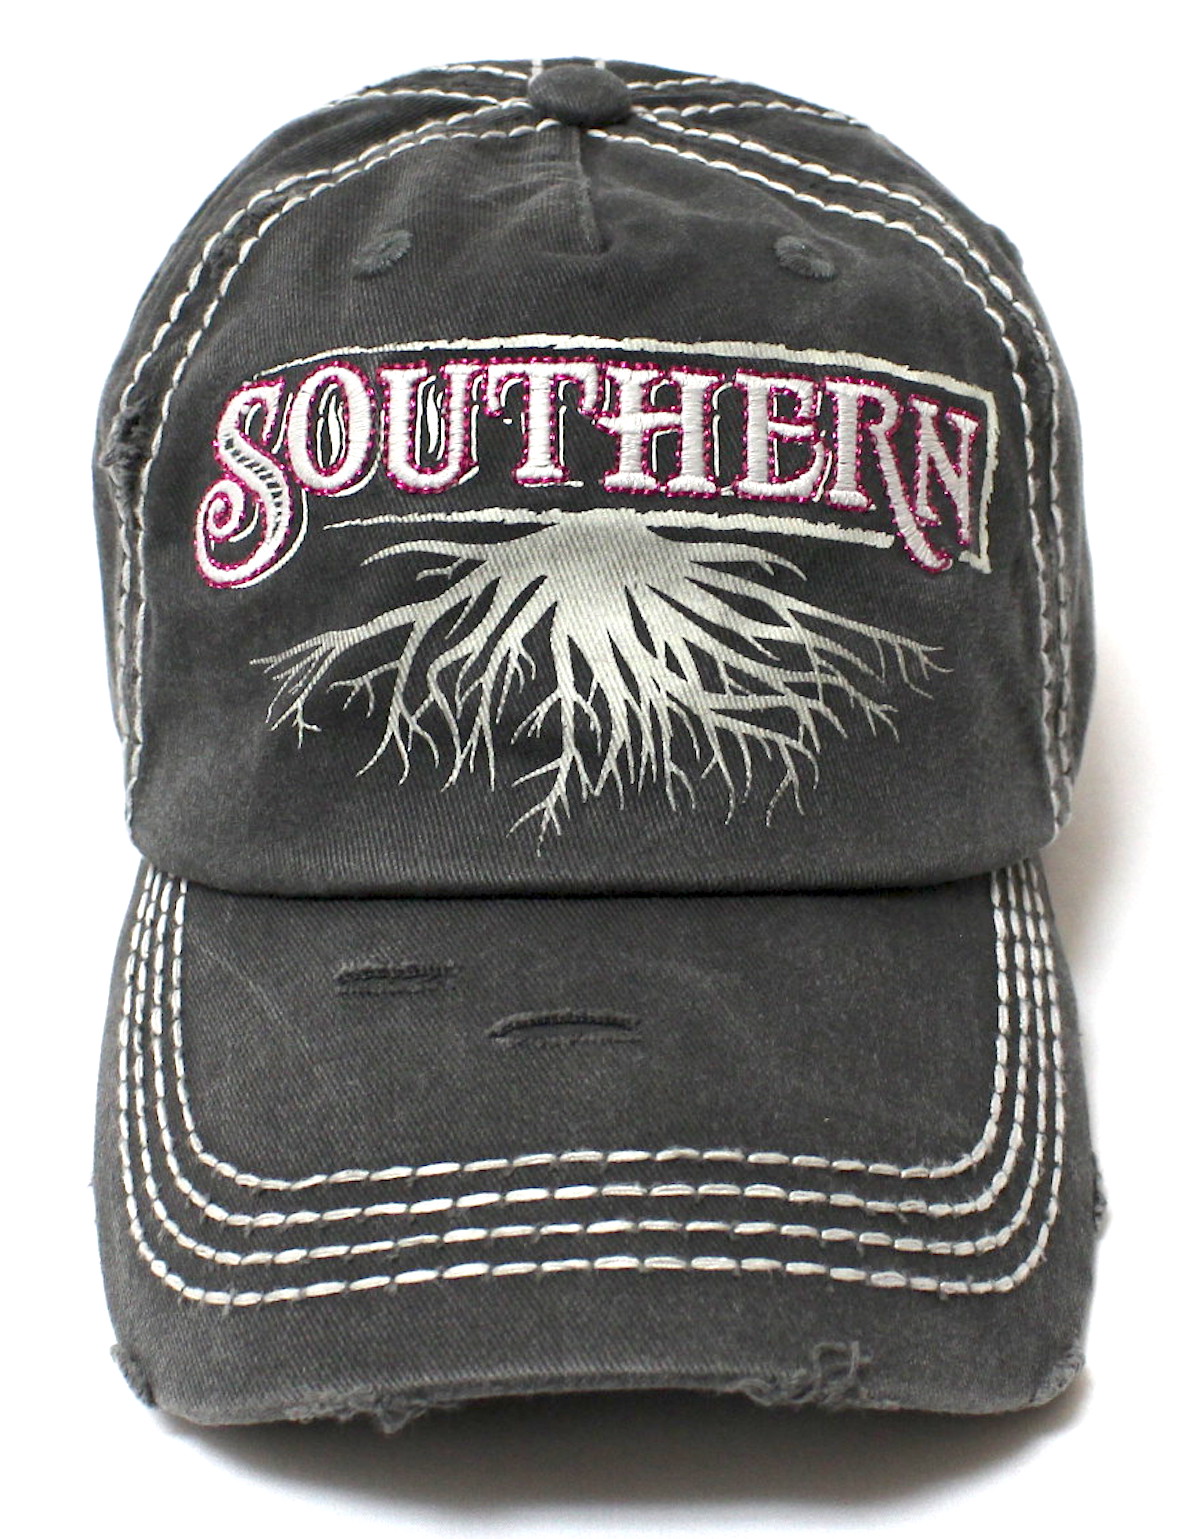 SouthernRoots_Bla_Front